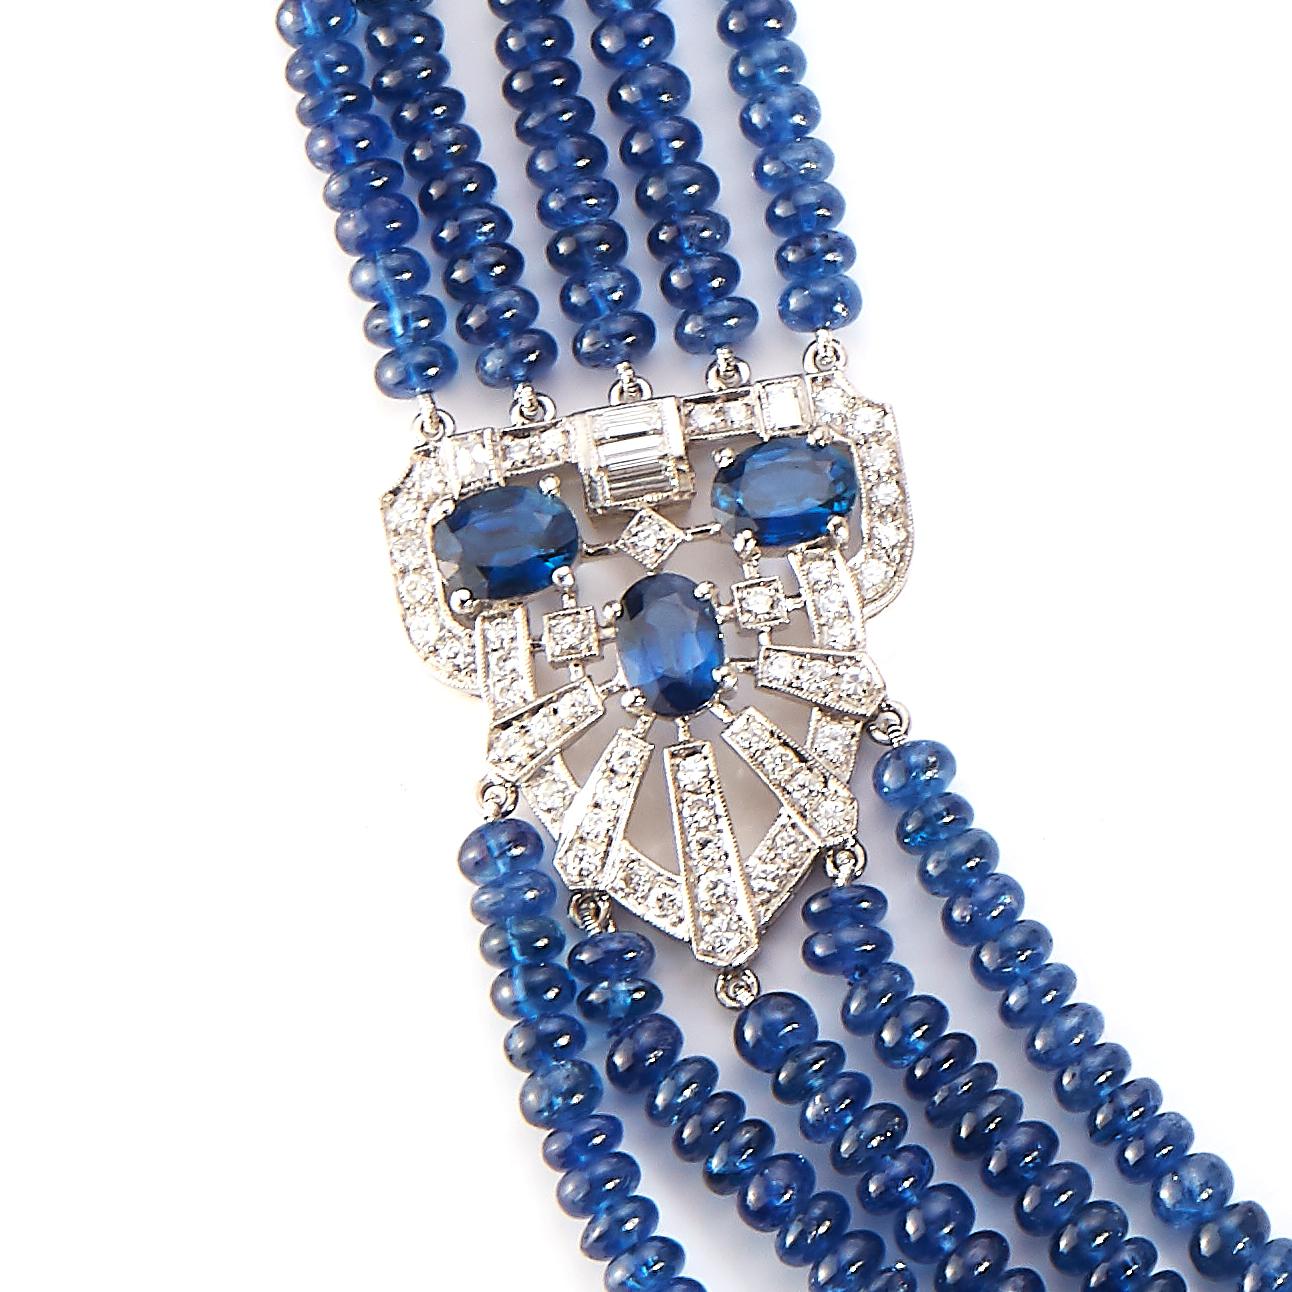 Estate Jewelry Curated by Parulina- This Blue Sapphire and Diamond necklace consists of multiple strands of Sapphire Beads accented with larger Blue Sapphires and Diamonds to beautifully frame the sides of necklace. This necklace has 625ct of